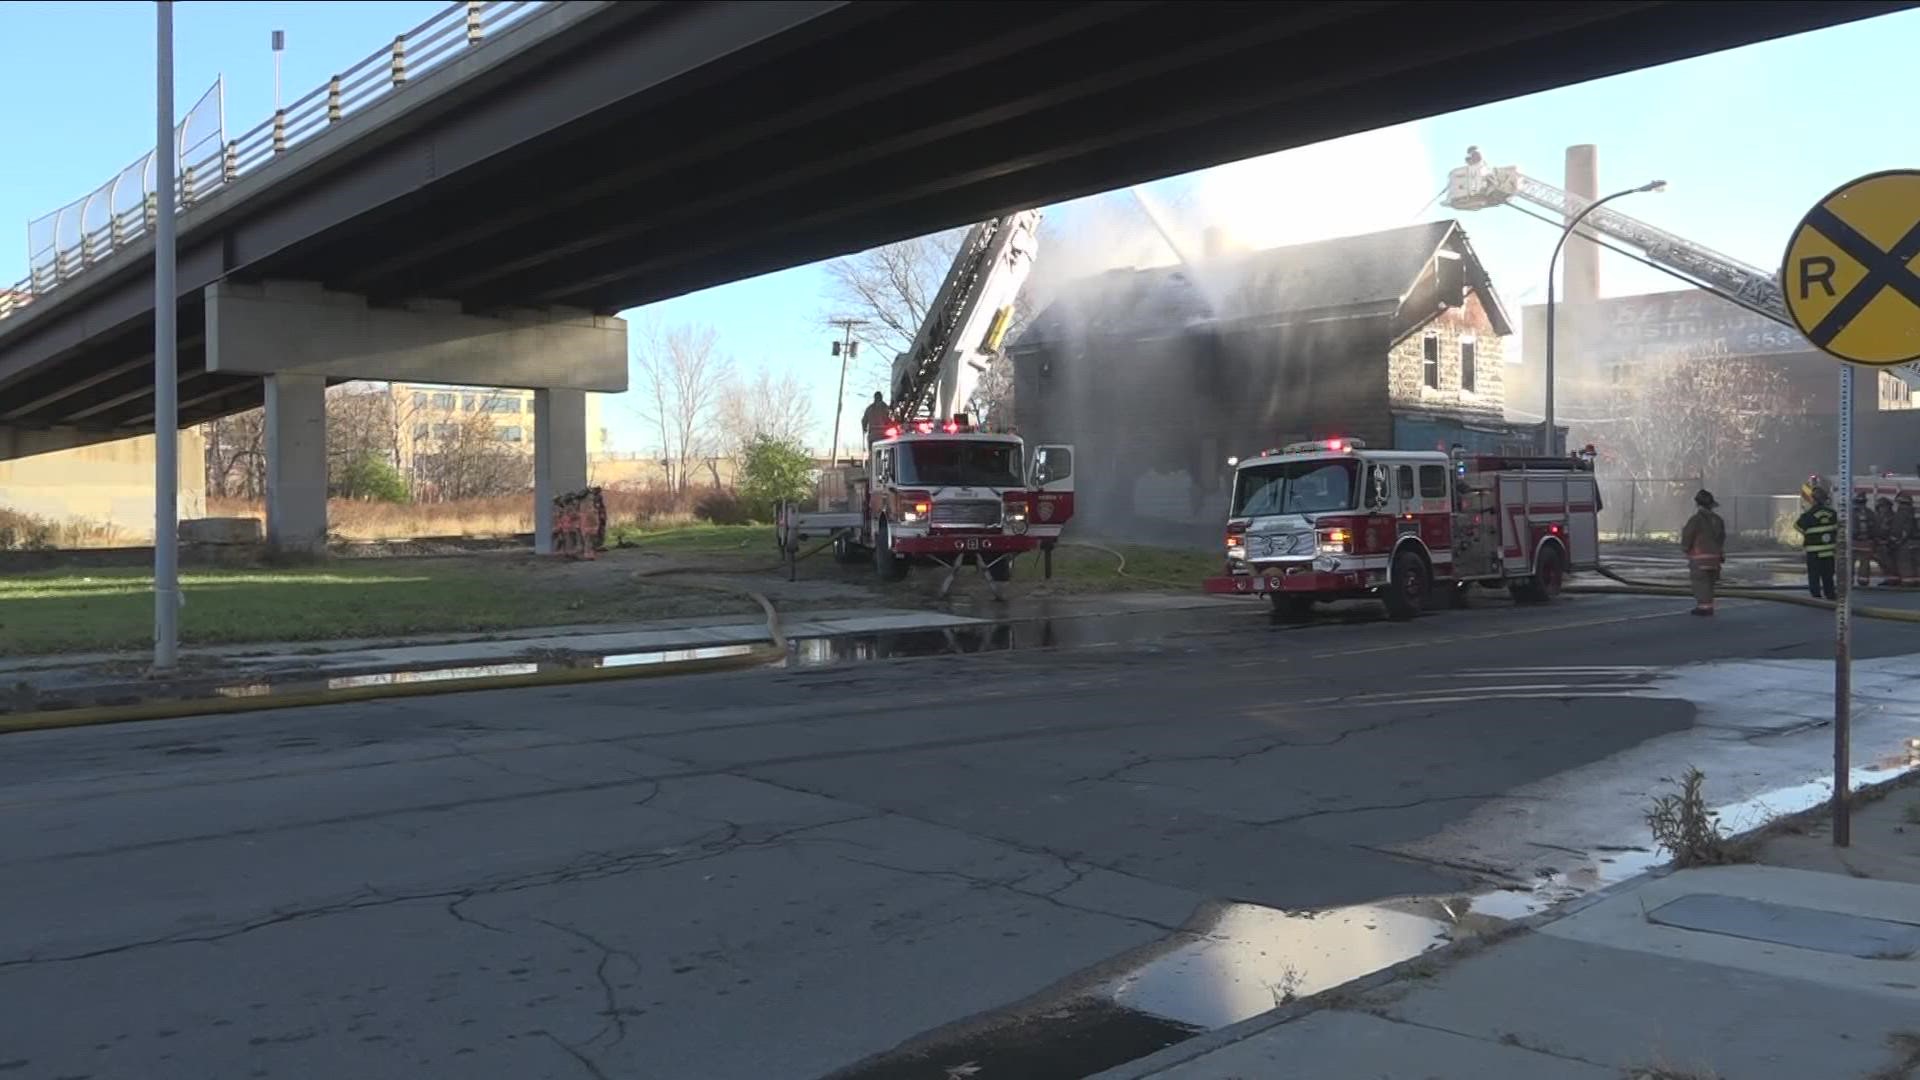 Buffalo fire officials told us they don't know the cause. but did call it *suspicious.